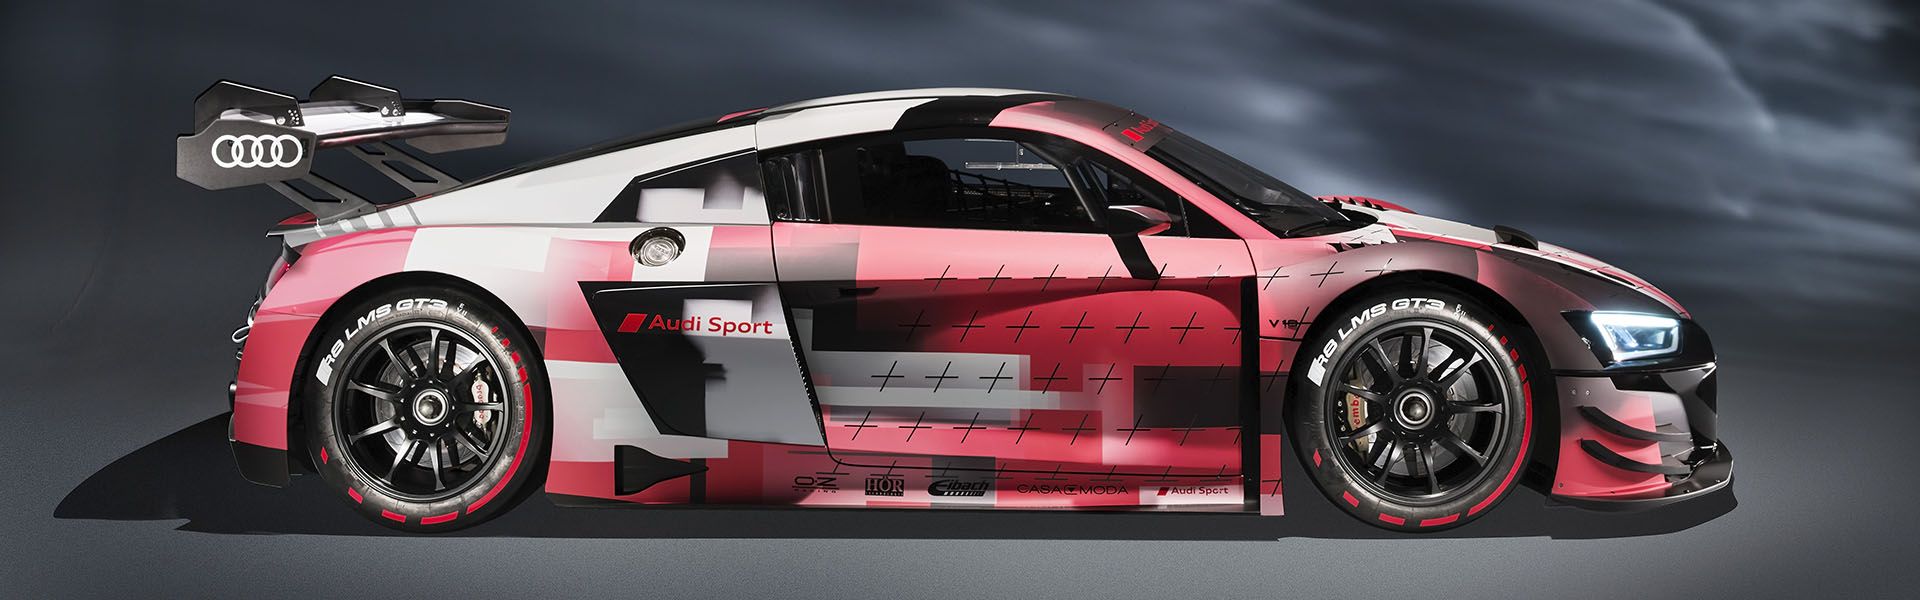 Audi R8 LMS on the racetrack 